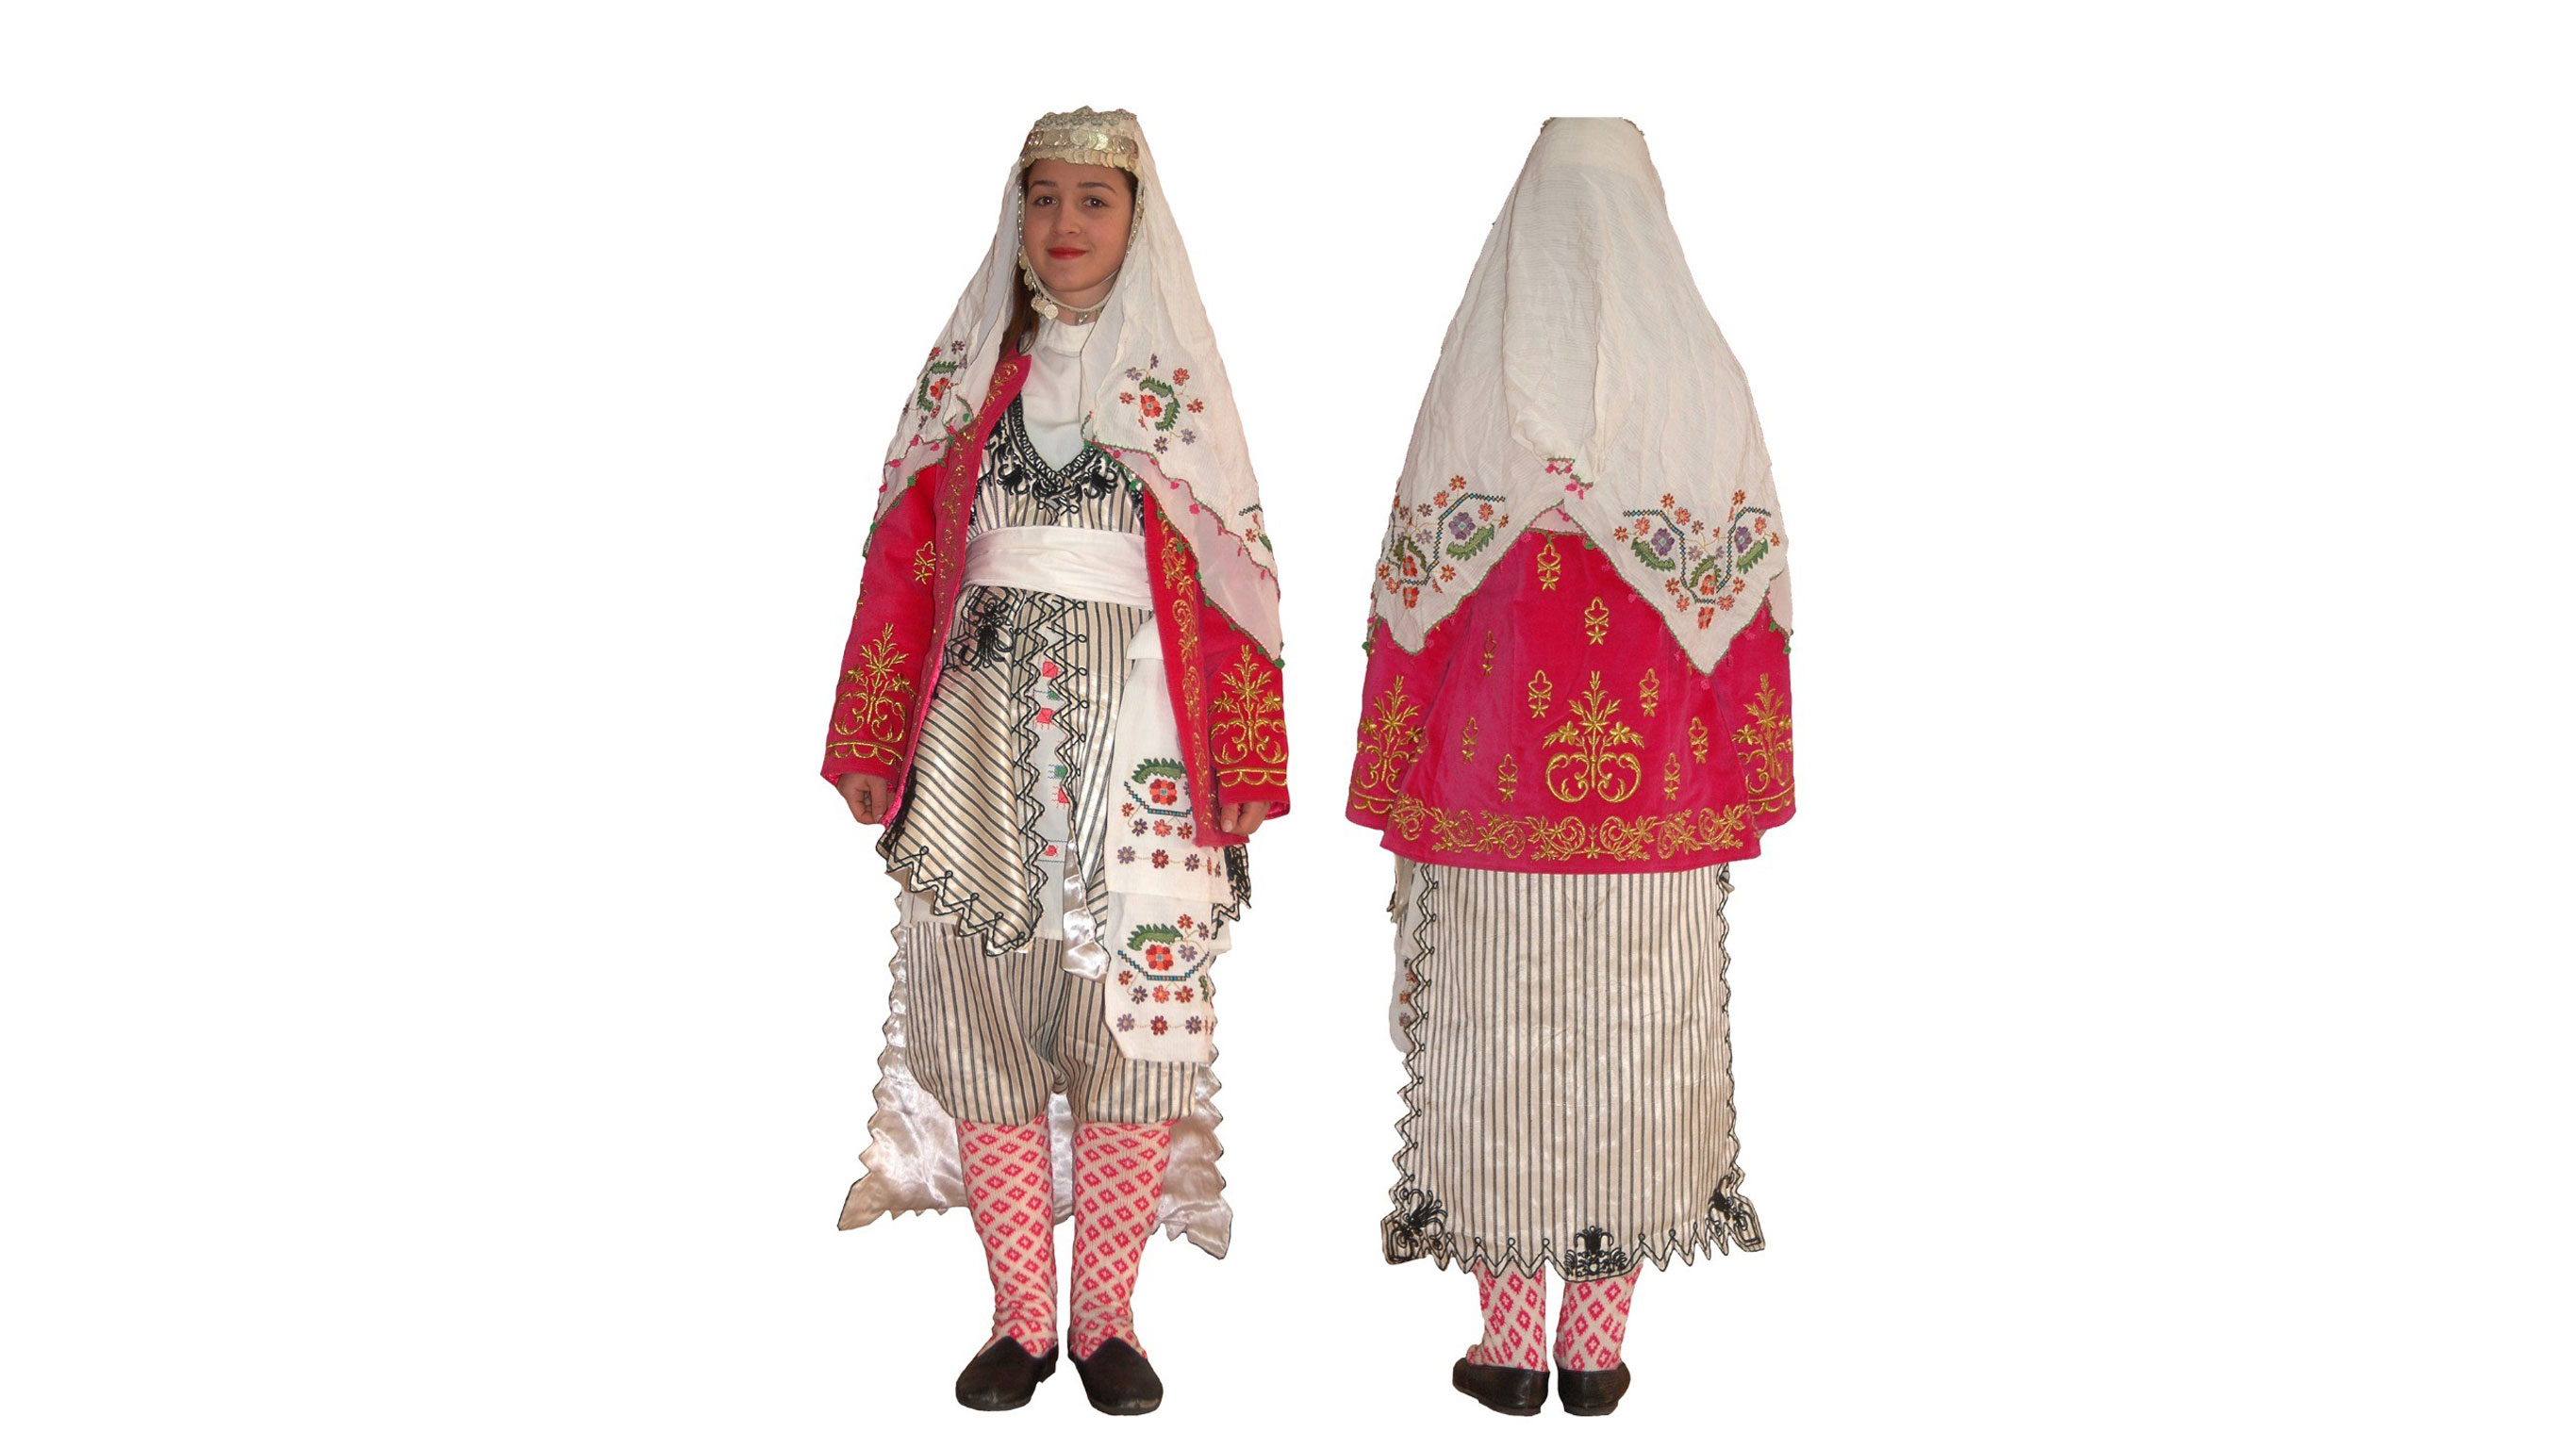 Turkish folk costumes reflect roots from the Balkans, Central Asia -  Al-Monitor: Independent, trusted coverage of the Middle East